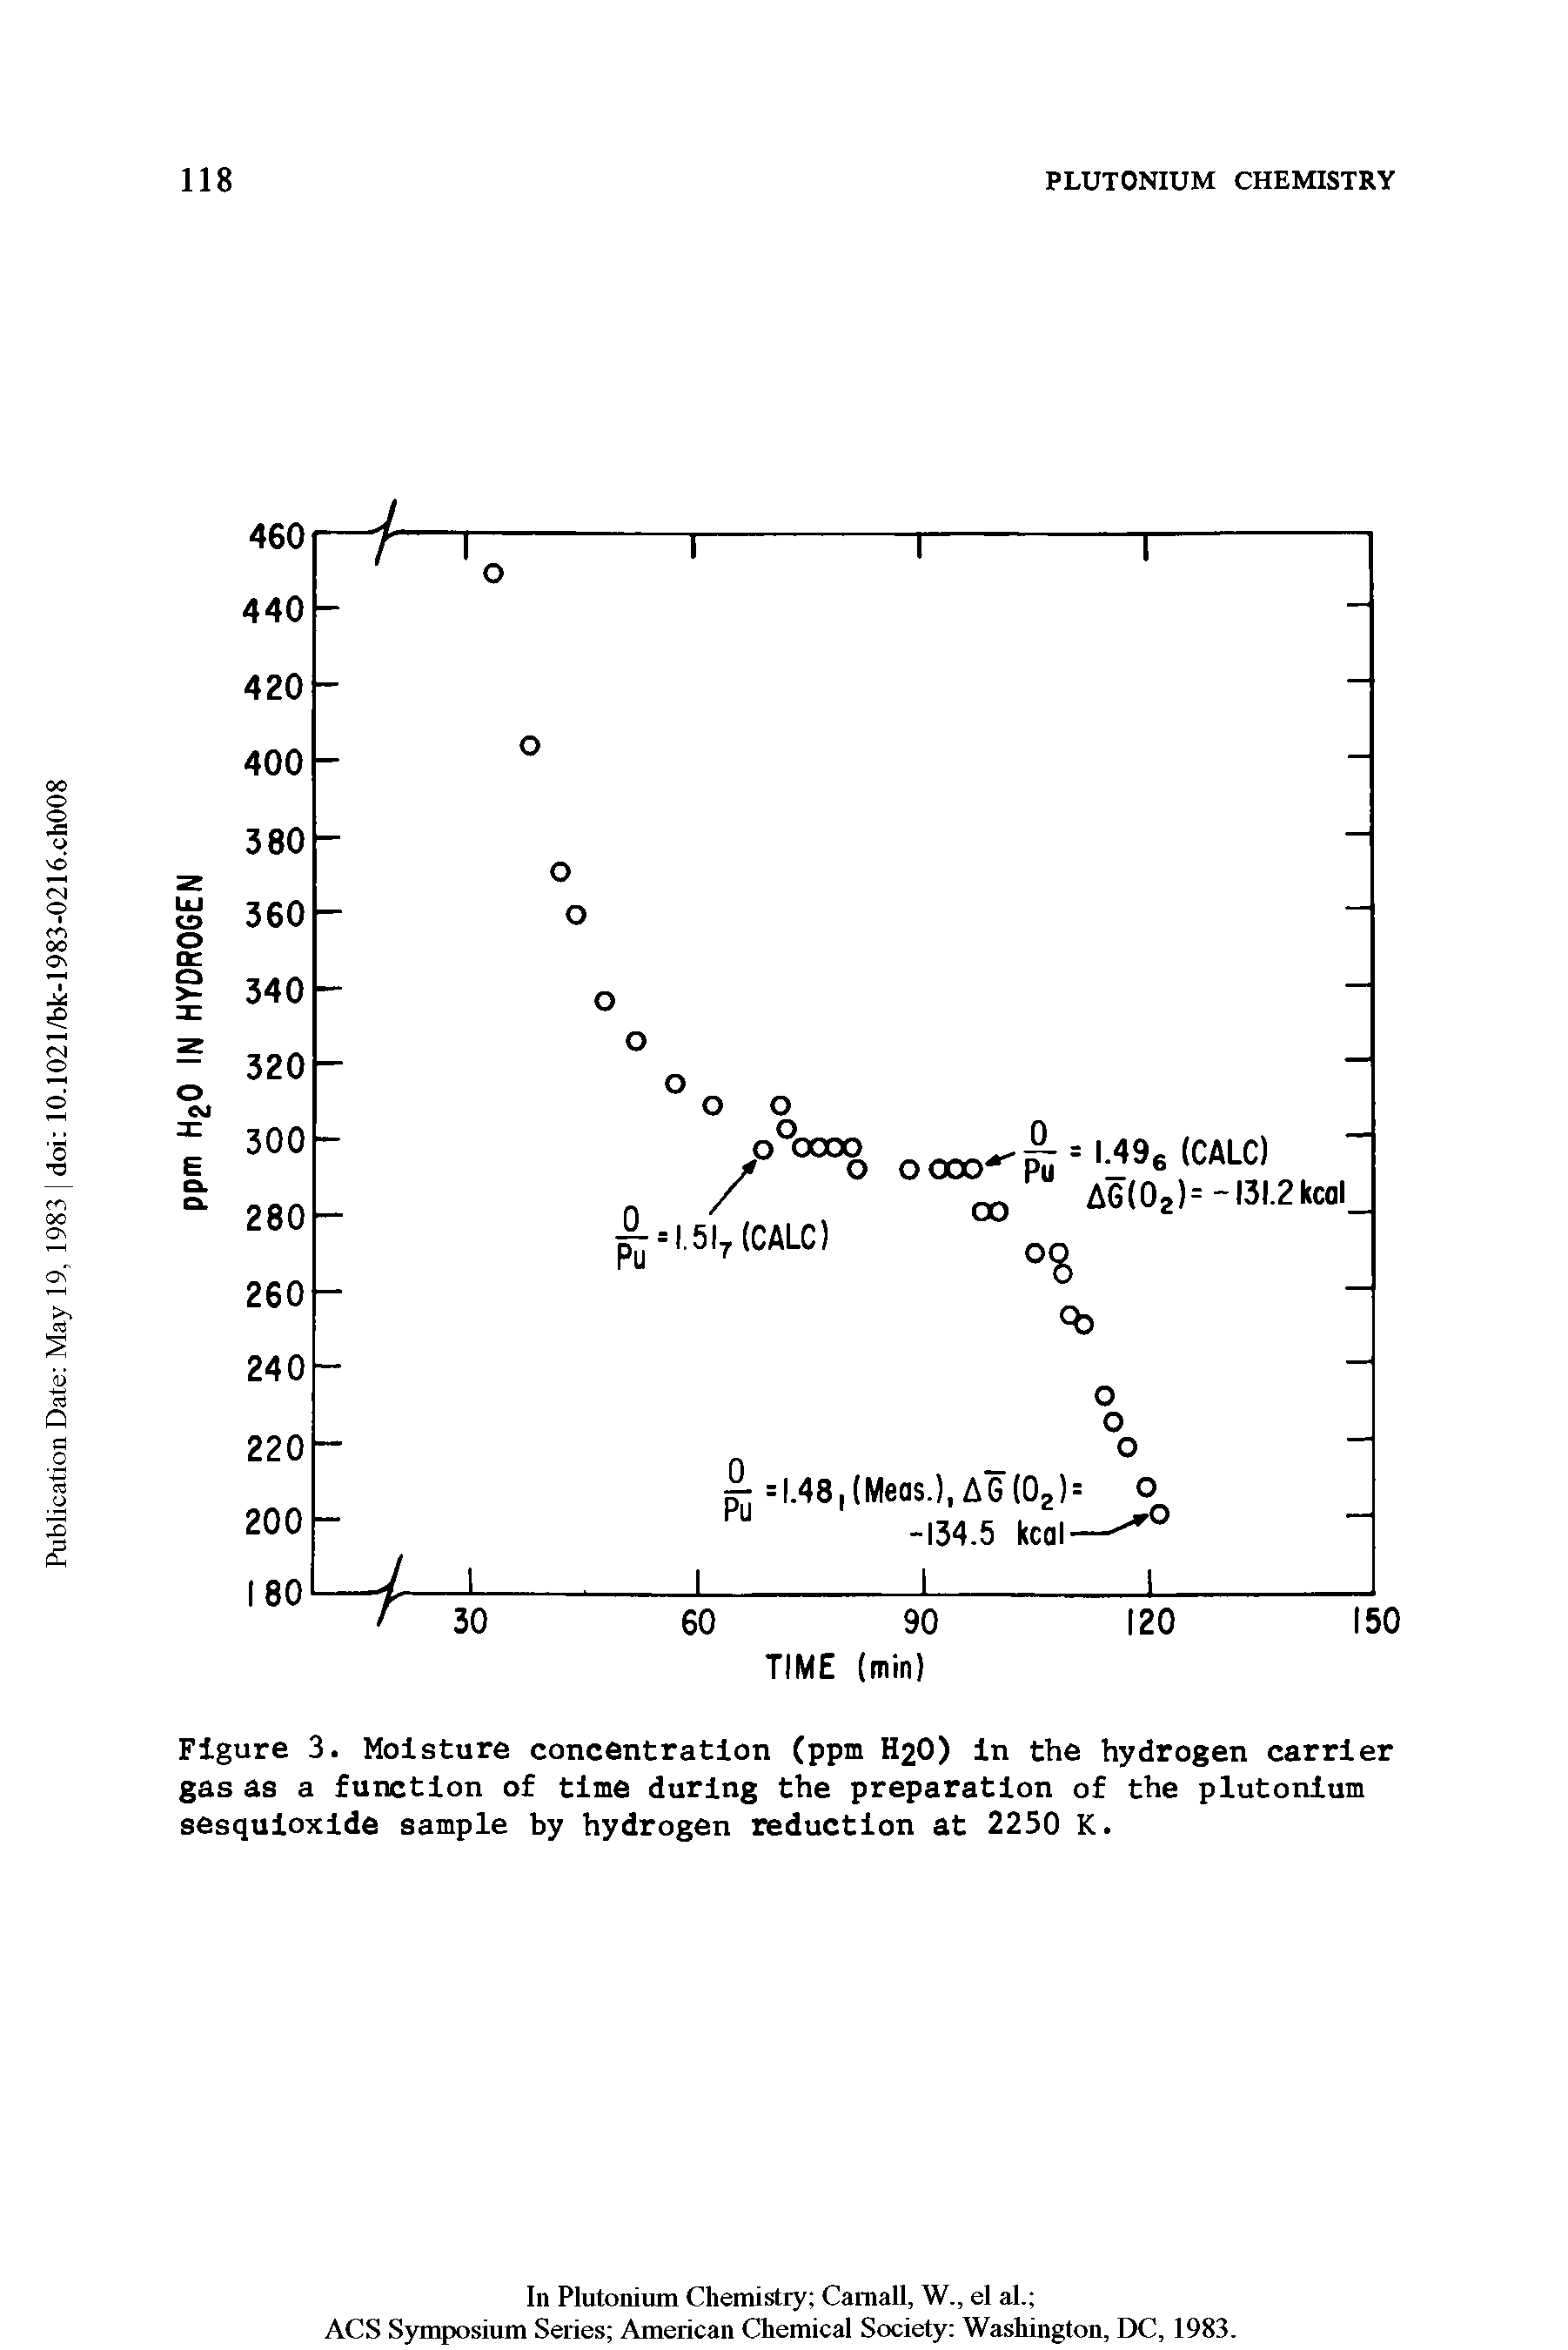 Figure 3. Moisture concentration (ppm H2O) in the hydrogen carrier gas as a function of time during the preparation of the plutonium sesquioxide sample by hydrogen reduction at 2250 K.